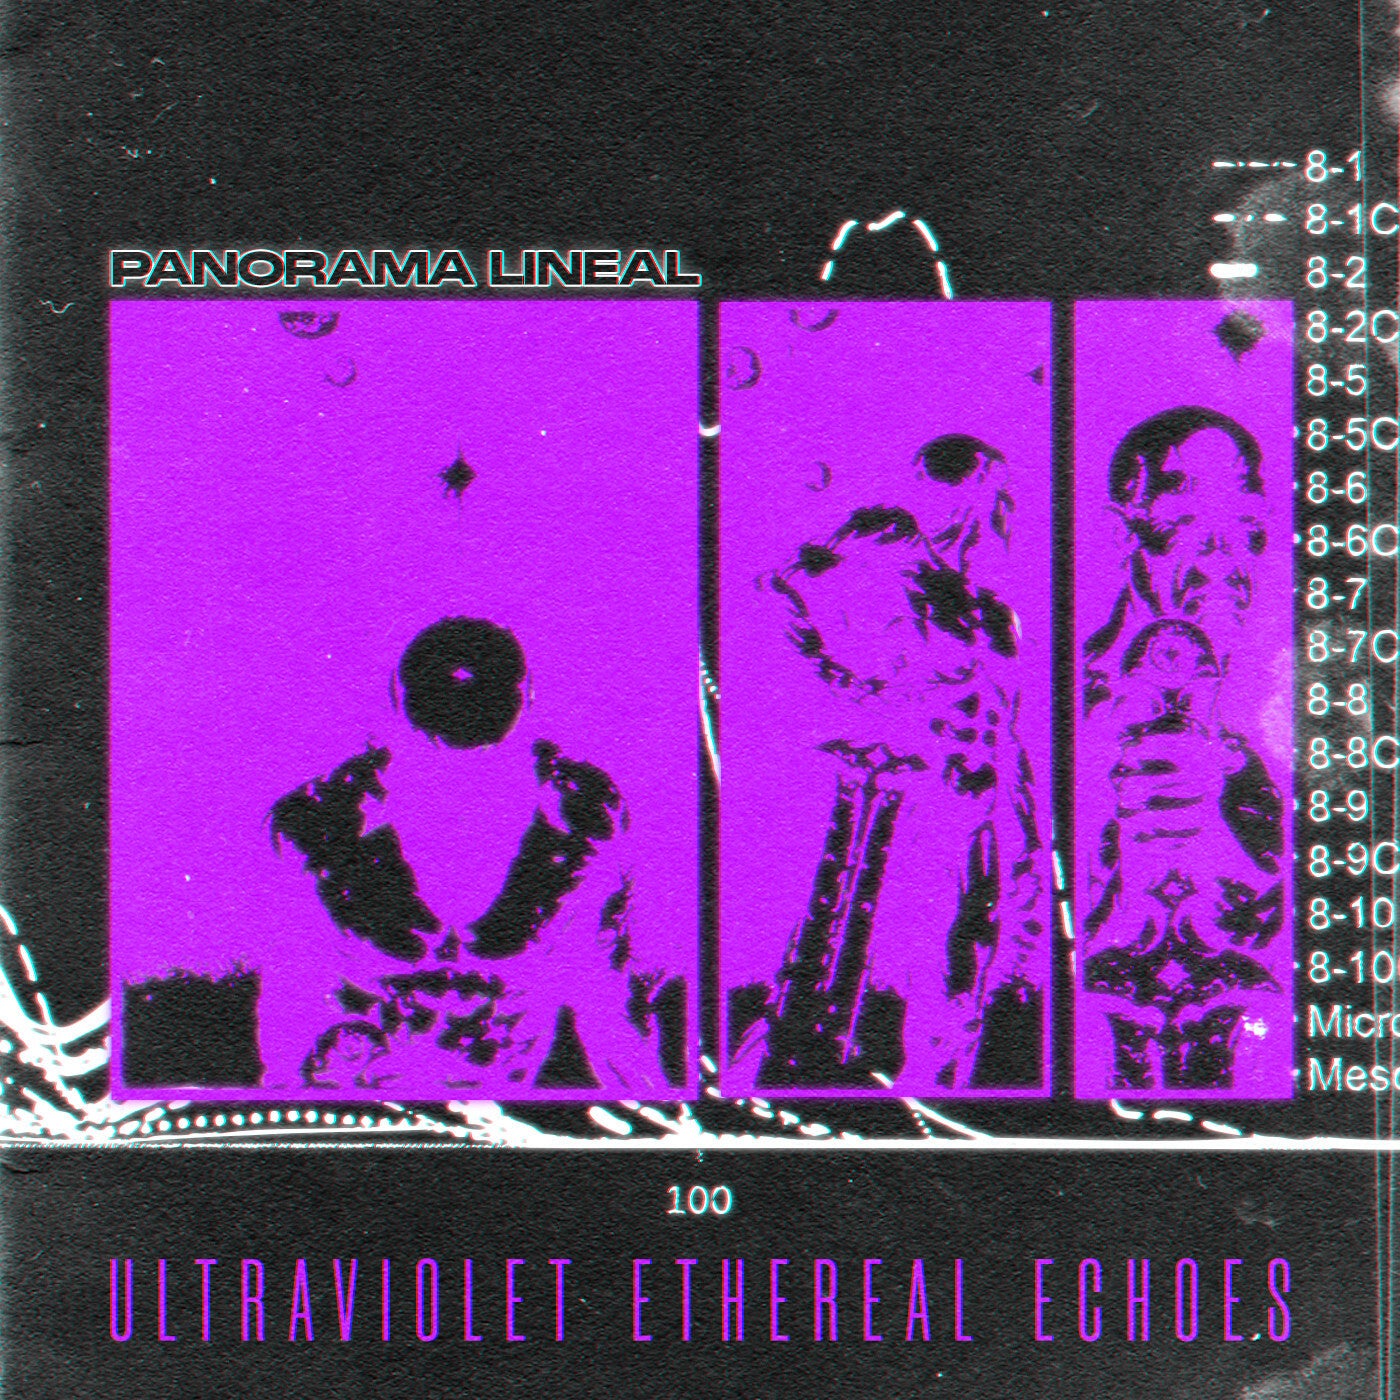 Ultraviolet Ethereal Echoes